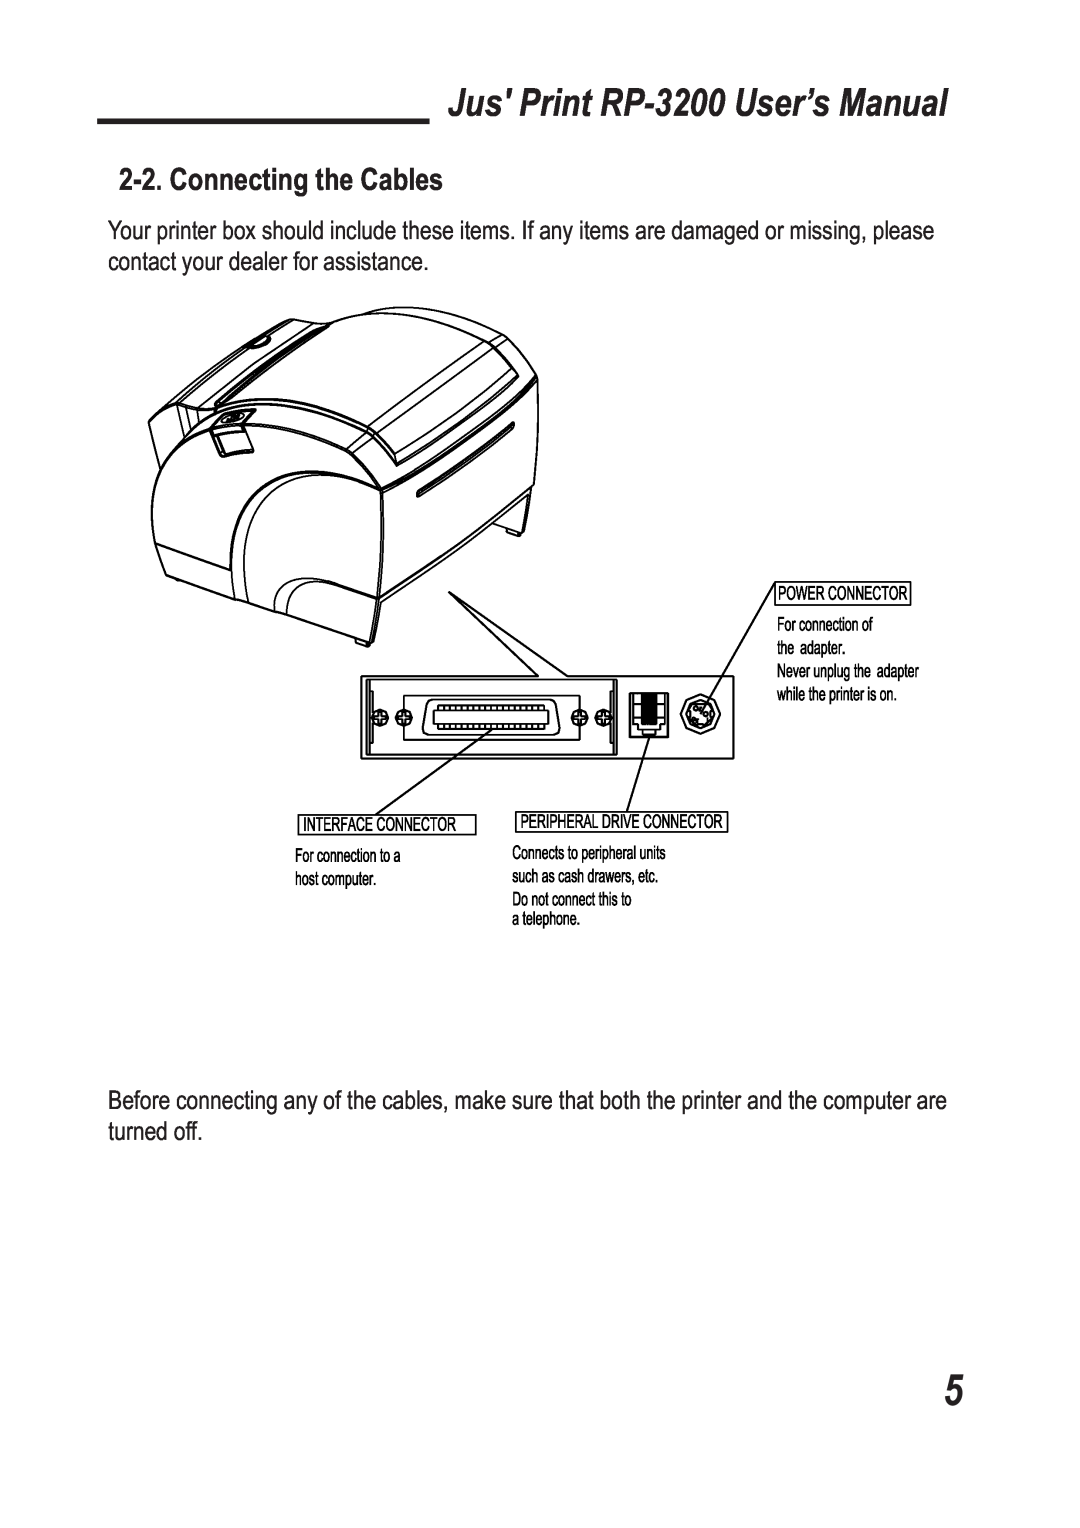 TVS electronic specifications Connecting the Cables, Jus Print RP-3200 User’s Manual 